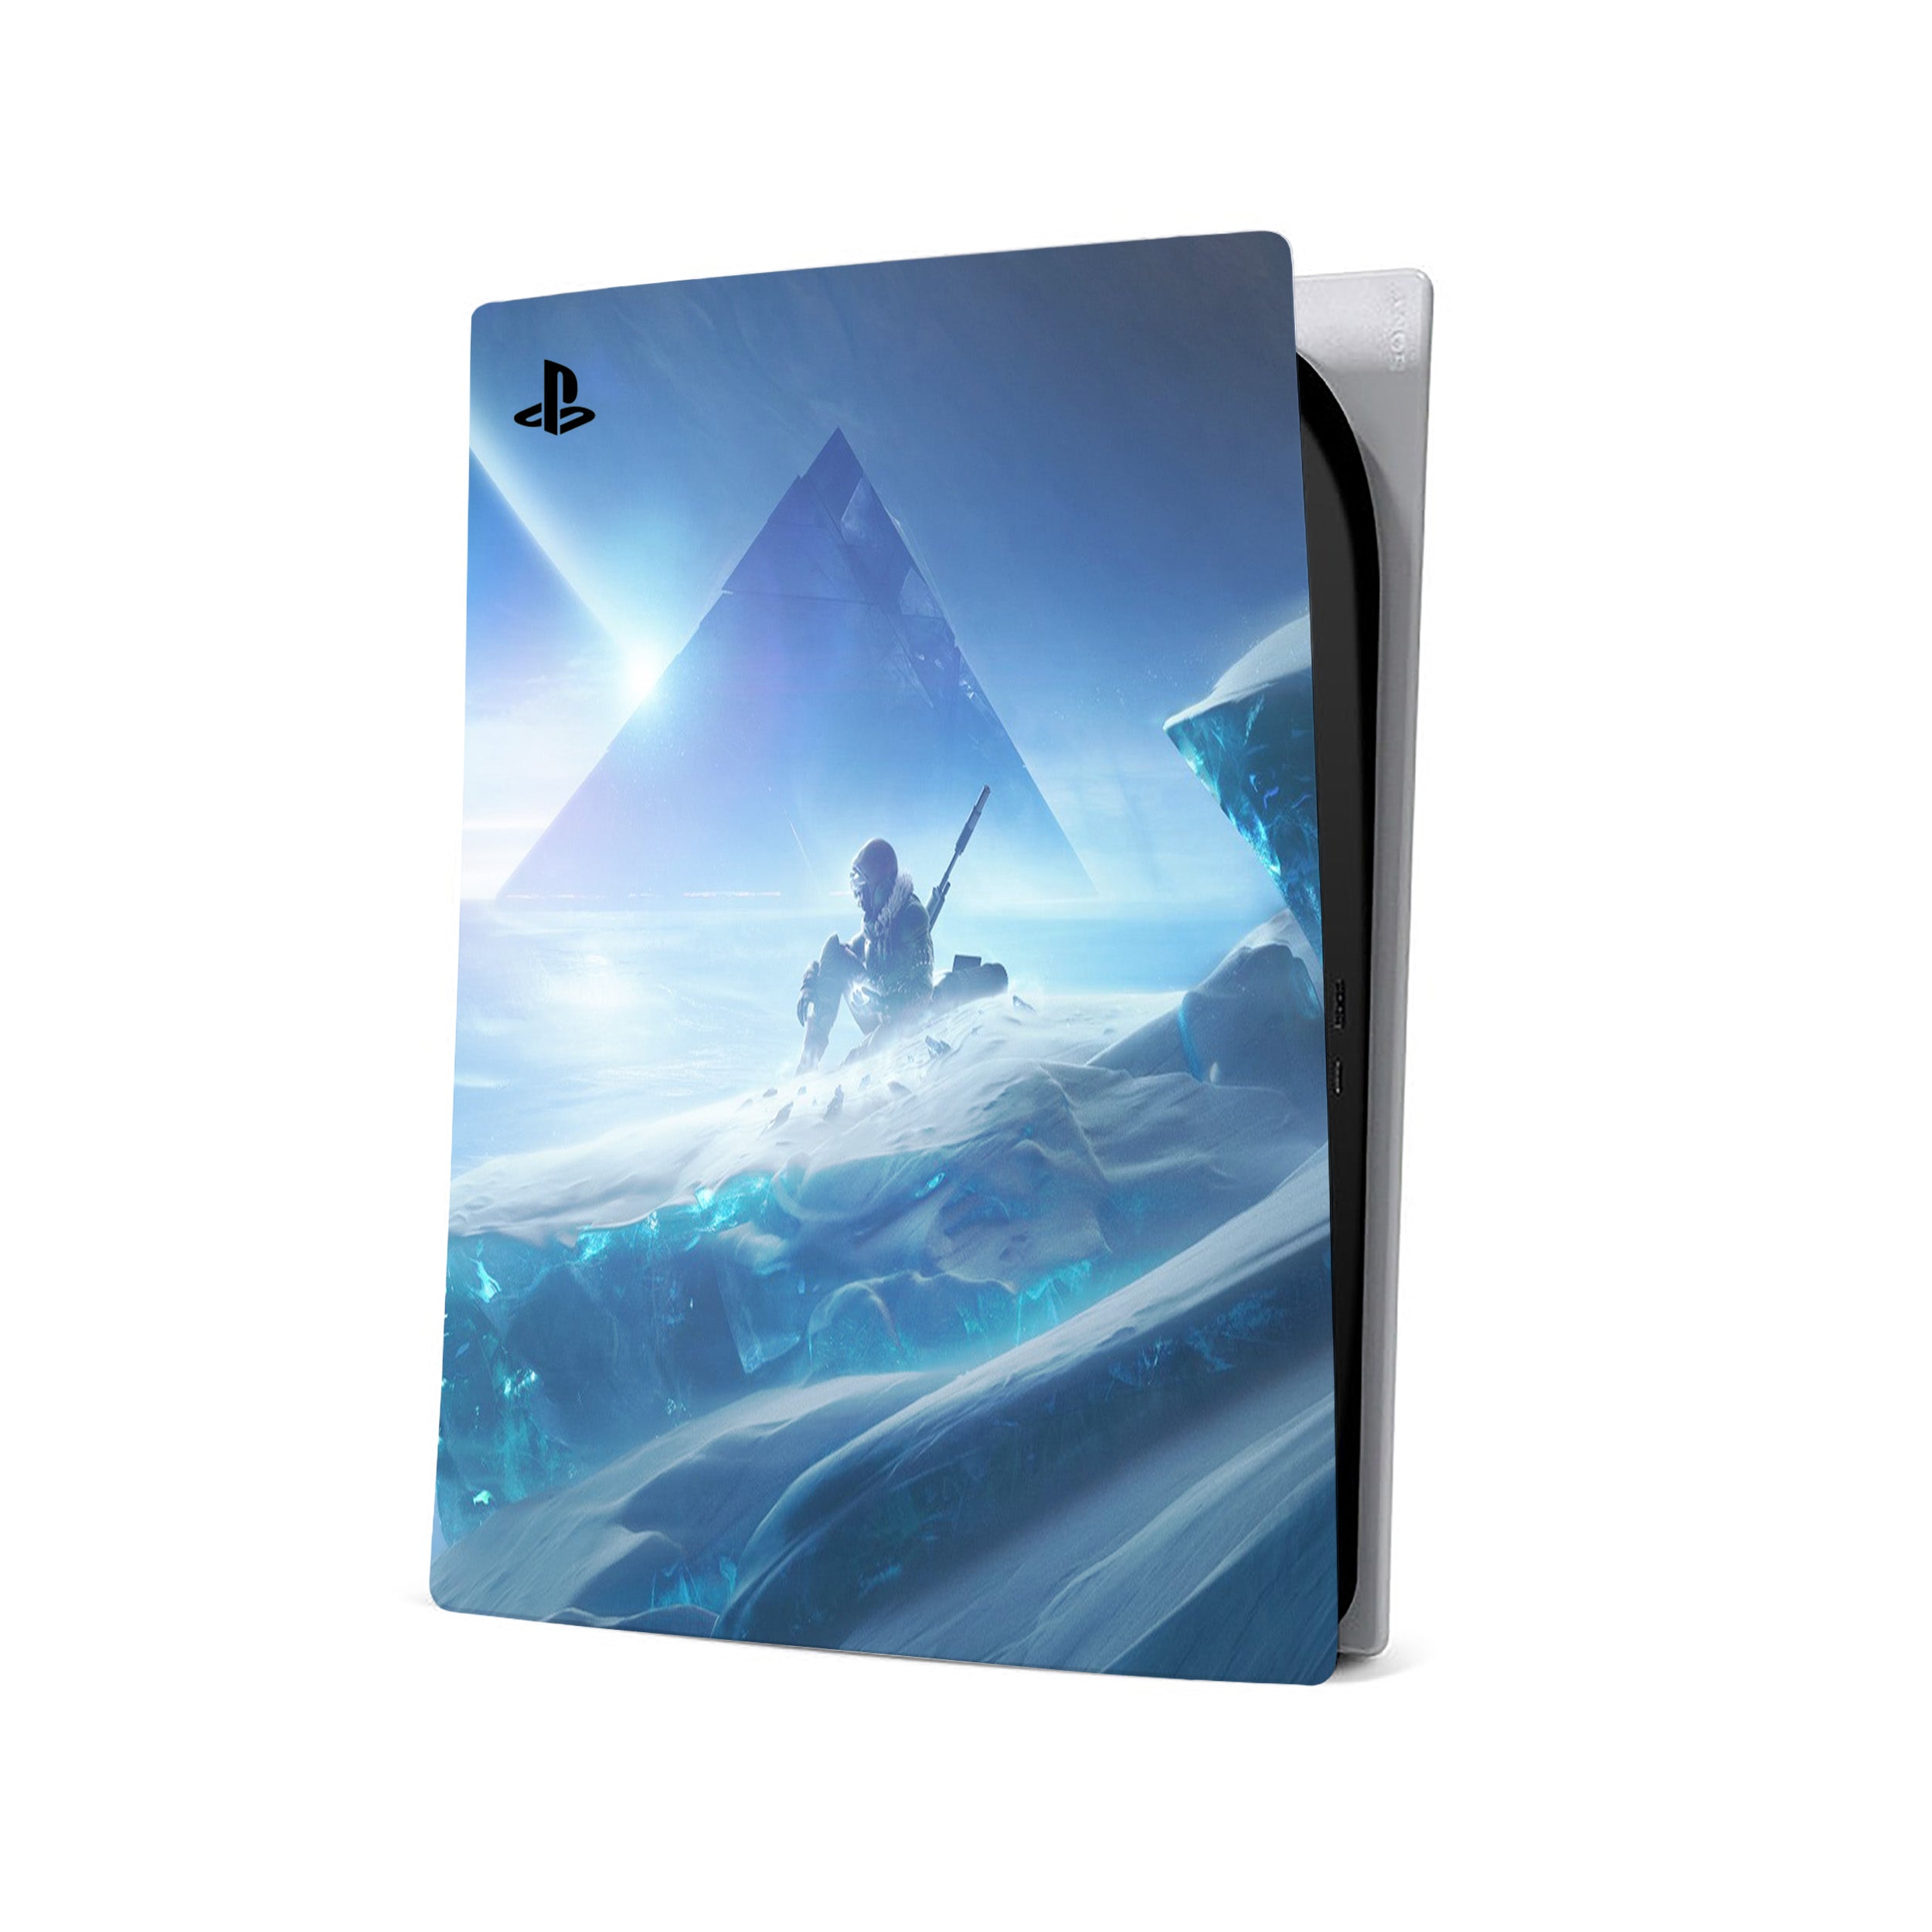 A video game skin featuring a Destiny 2 design for the PS5.